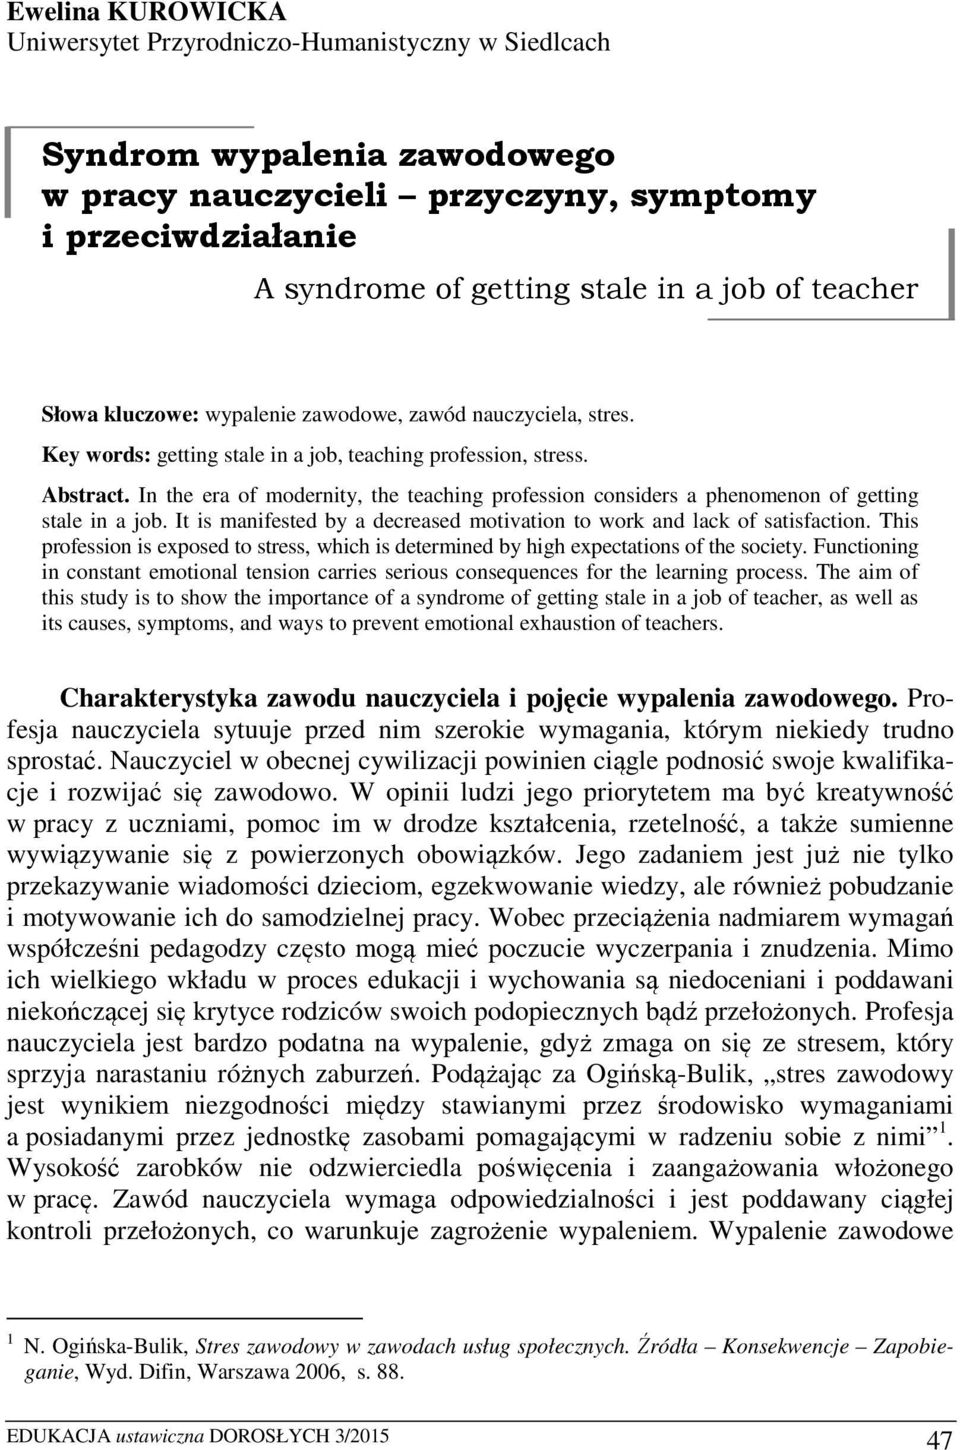 In the era of modernity, the teaching profession considers a phenomenon of getting stale in a job. It is manifested by a decreased motivation to work and lack of satisfaction.